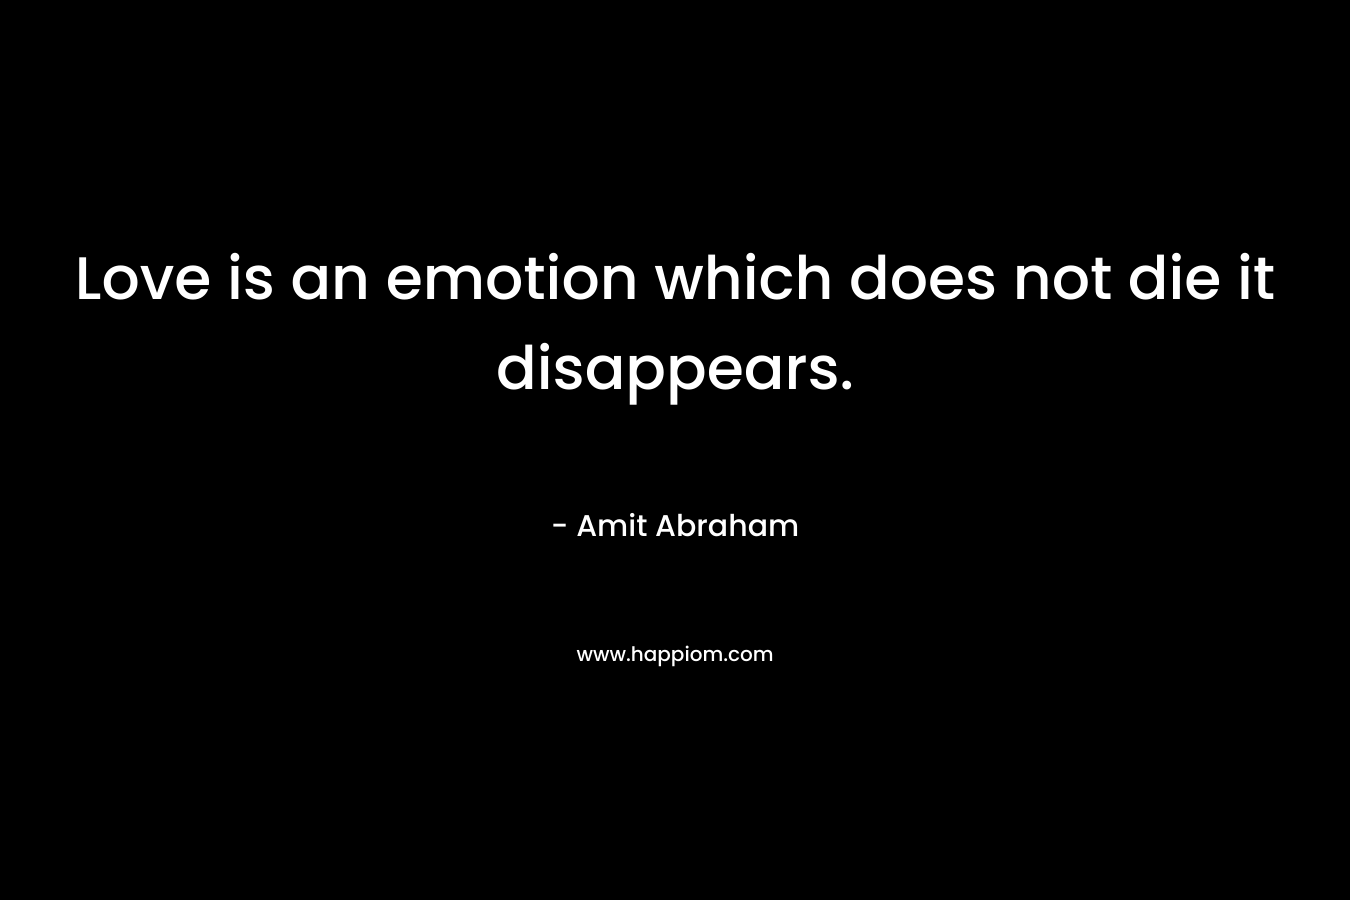 Love is an emotion which does not die it disappears. – Amit Abraham